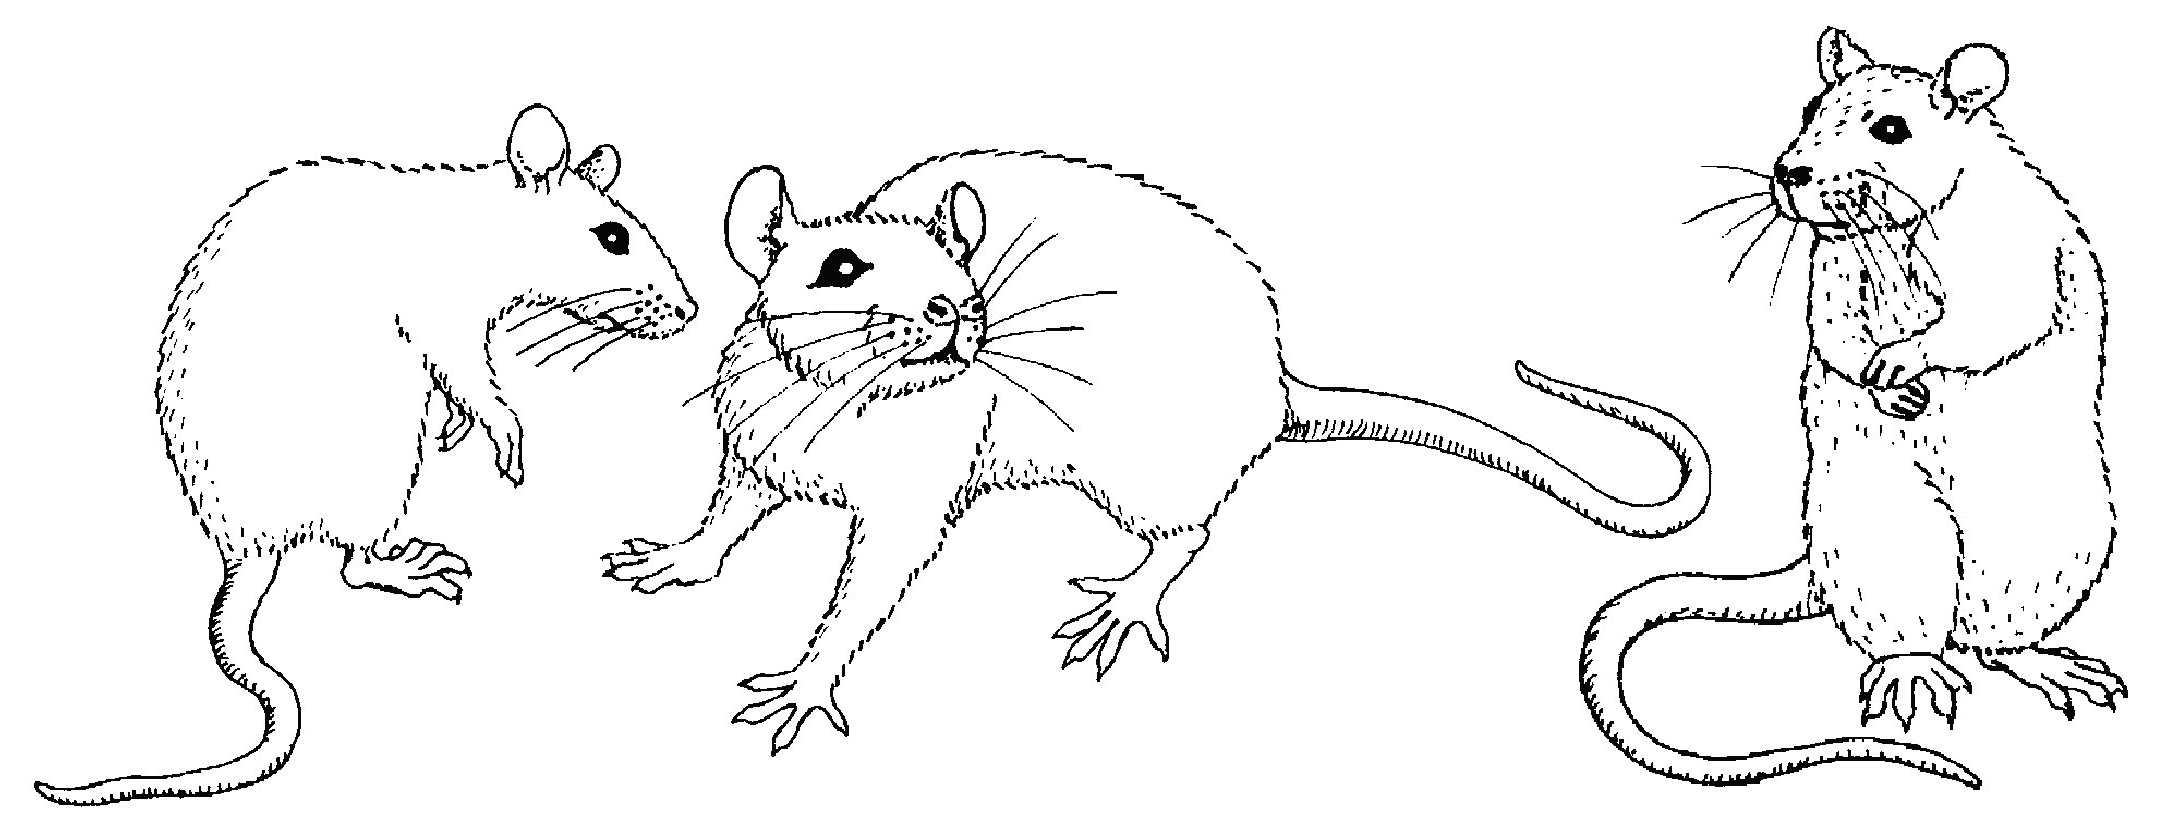 Simple drawings of rats in typical poses